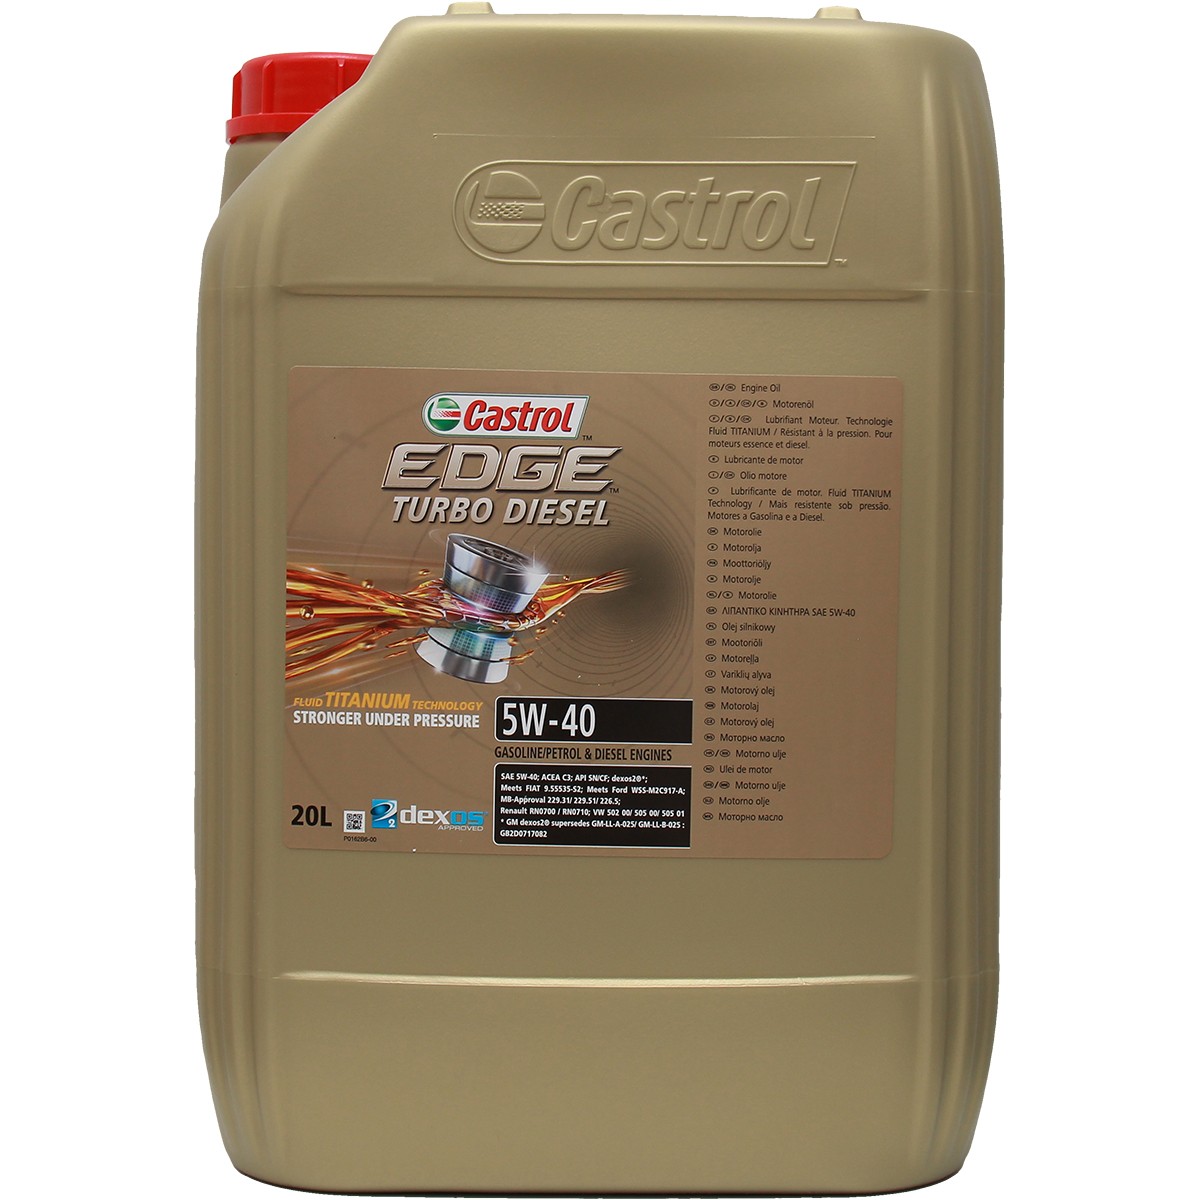 Great value for money - CASTROL Engine oil 1535B1